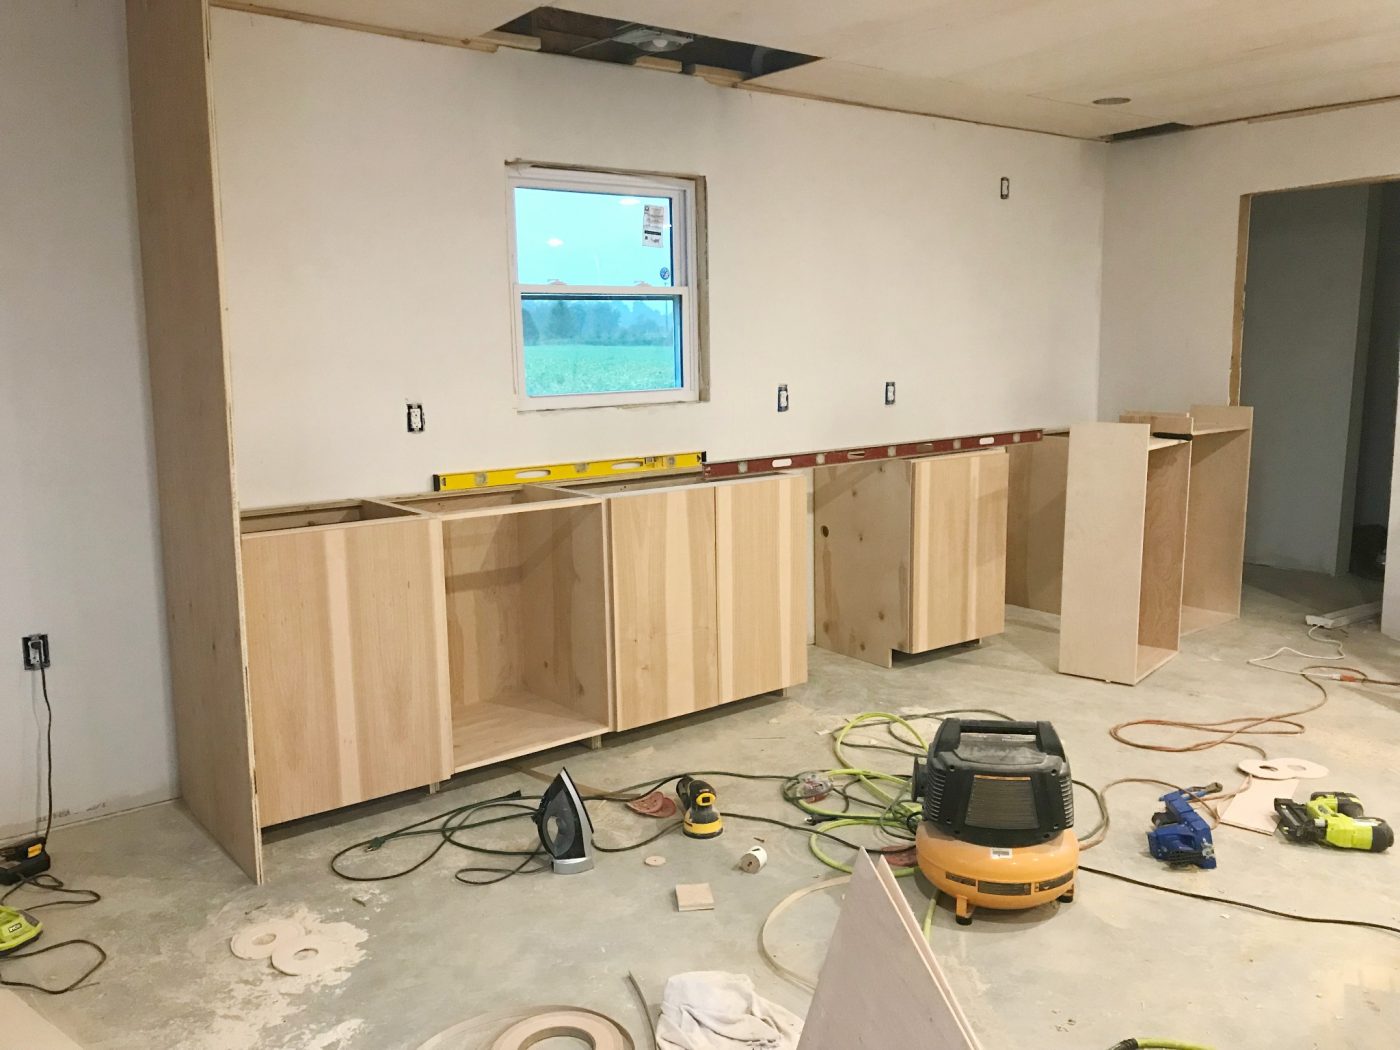 2x4 bracing on framing to attach plywood ceiling to